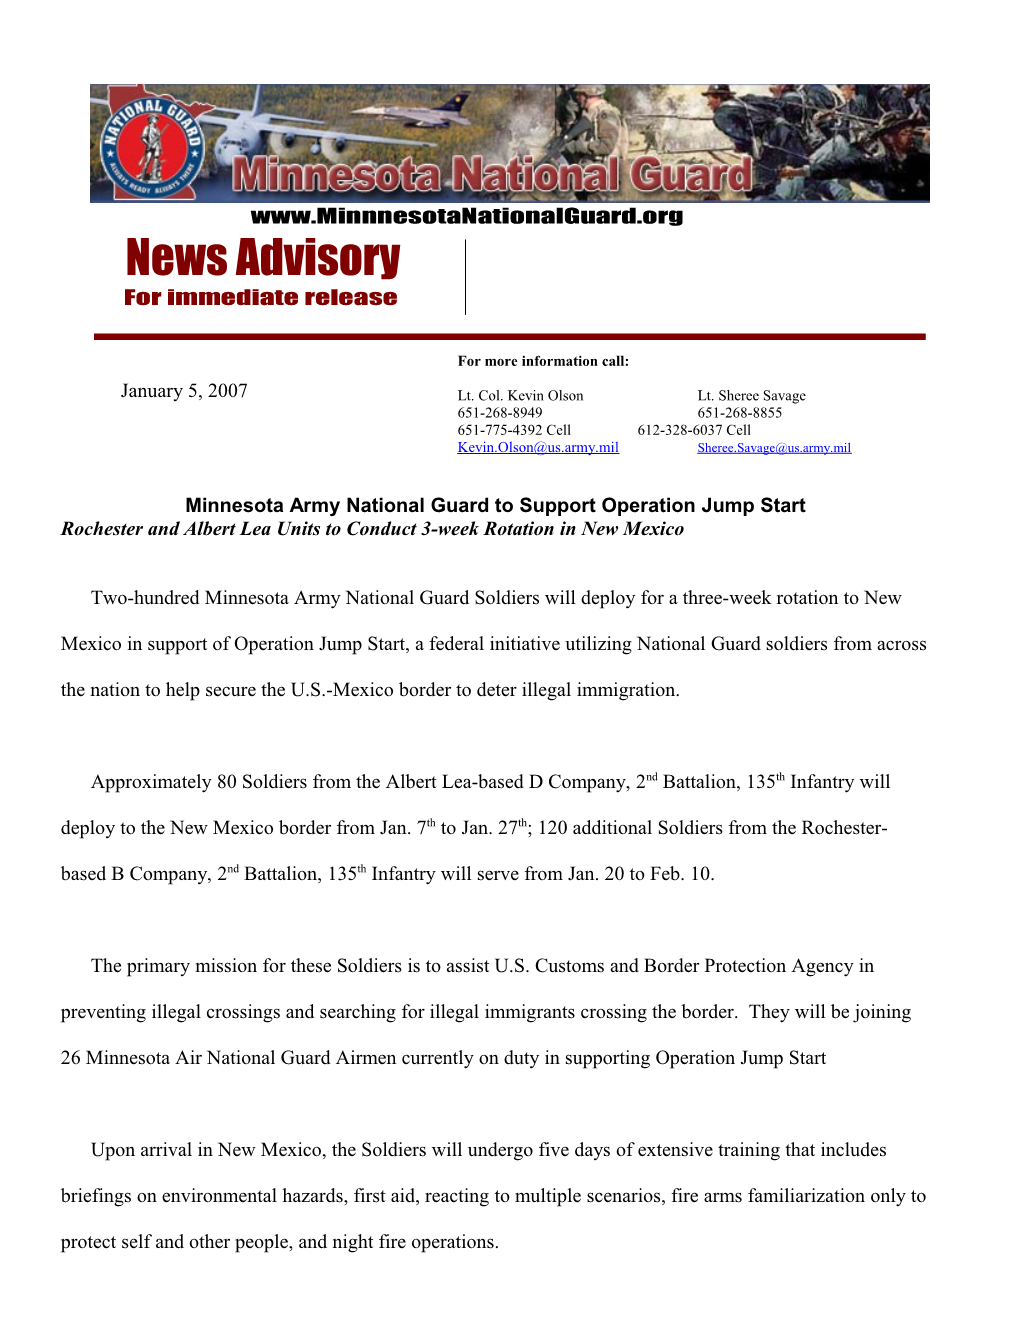 Minnesota Army National Guard to Support Operation Jump Start